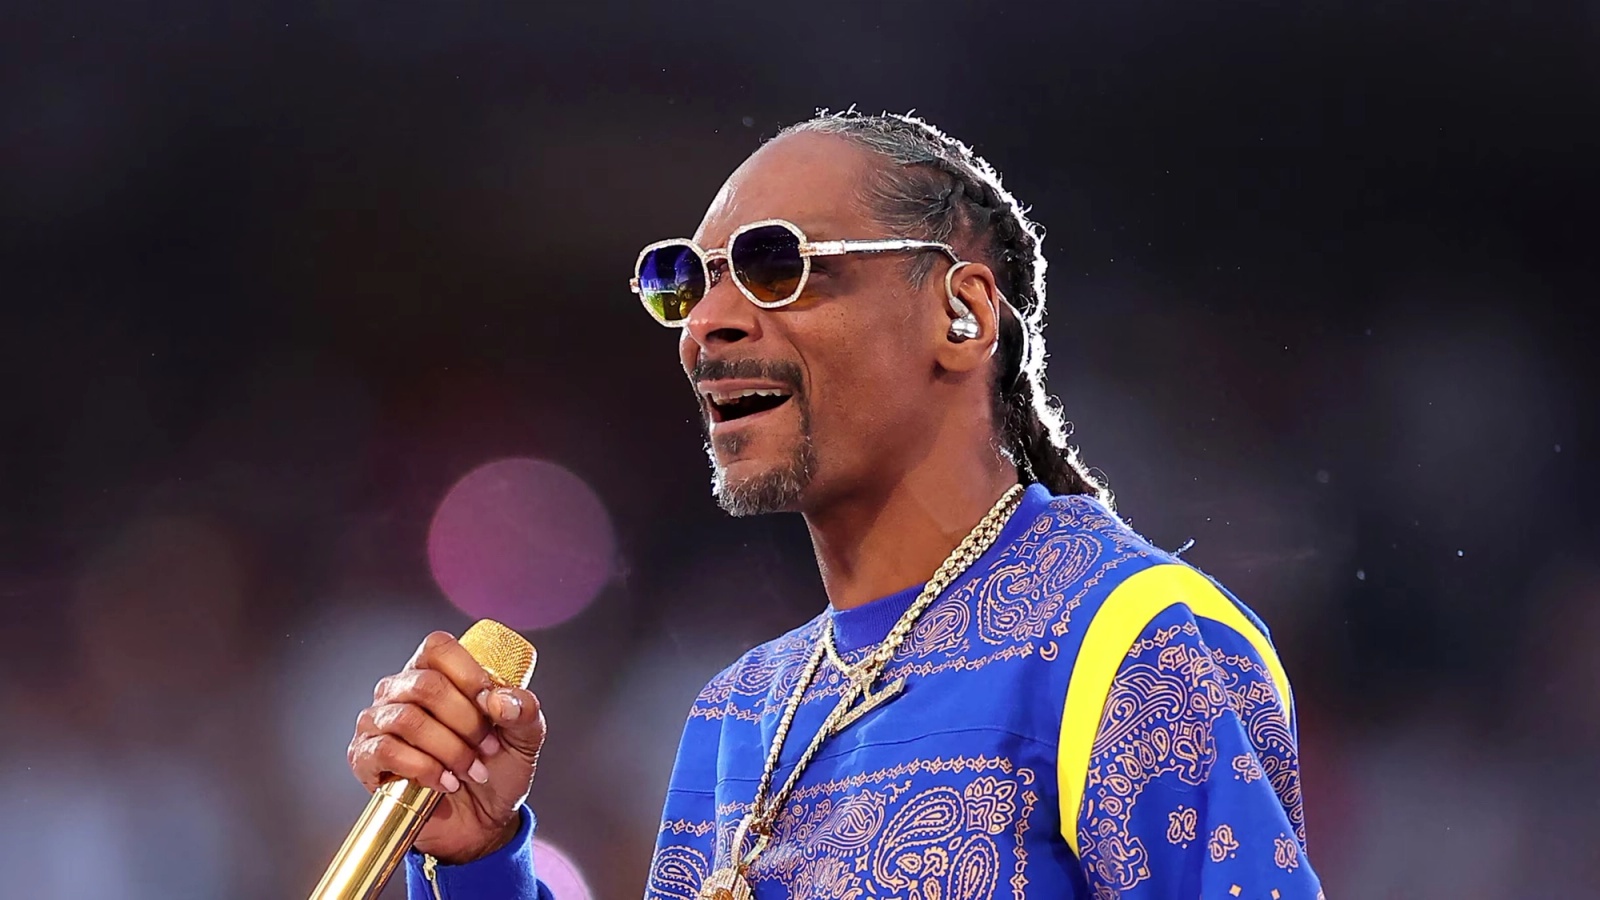 Snoop Dogg commentating at the 2024 U.S. Olympic Trials